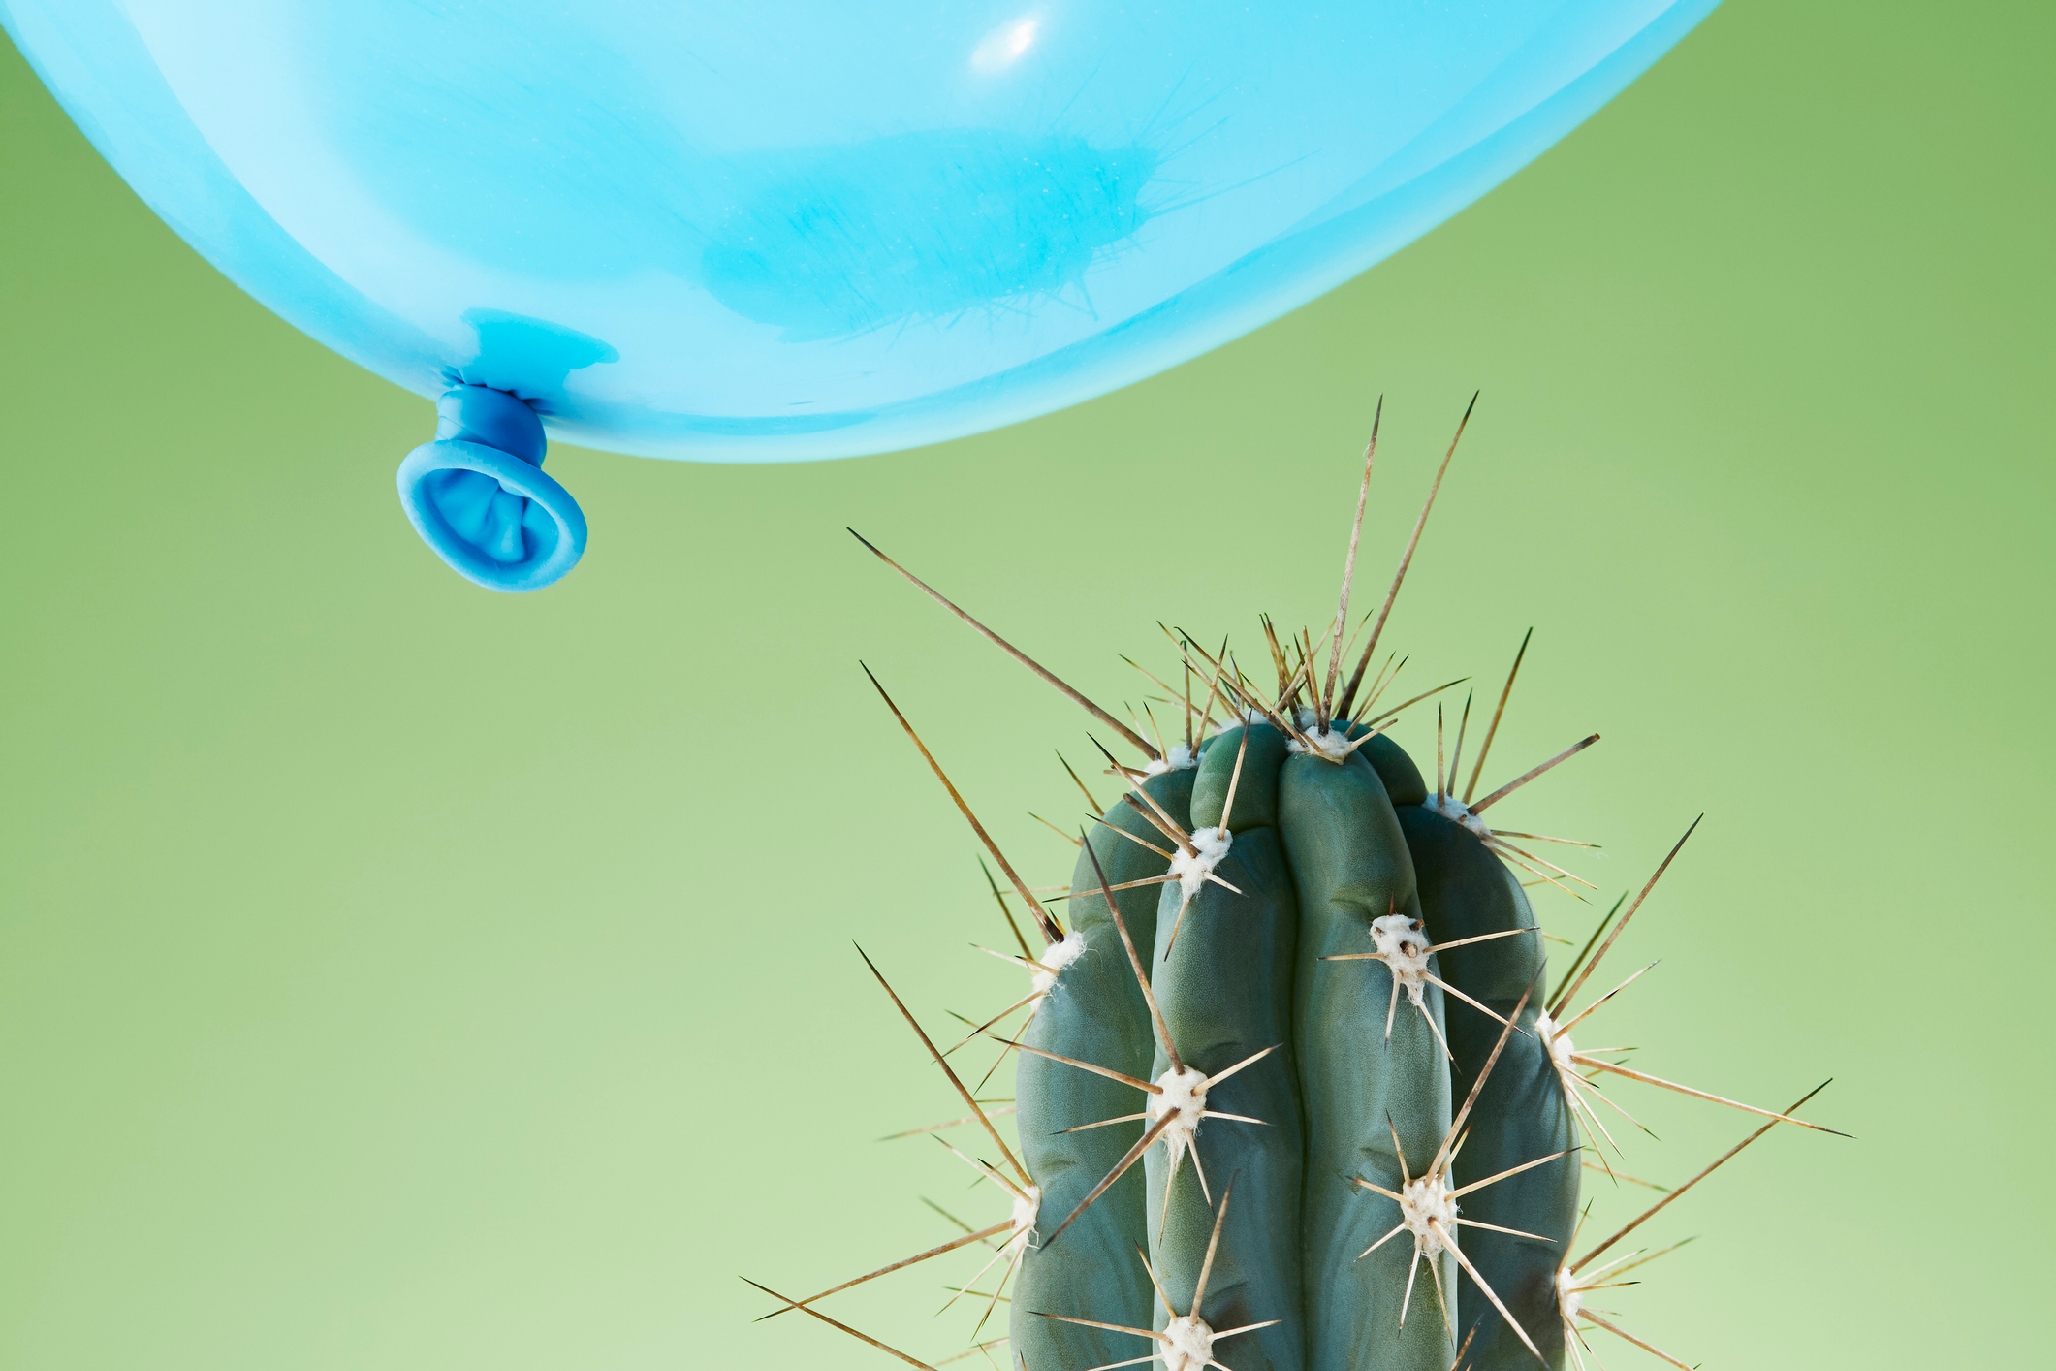 Photo of a balloon close to being popped by a cactus